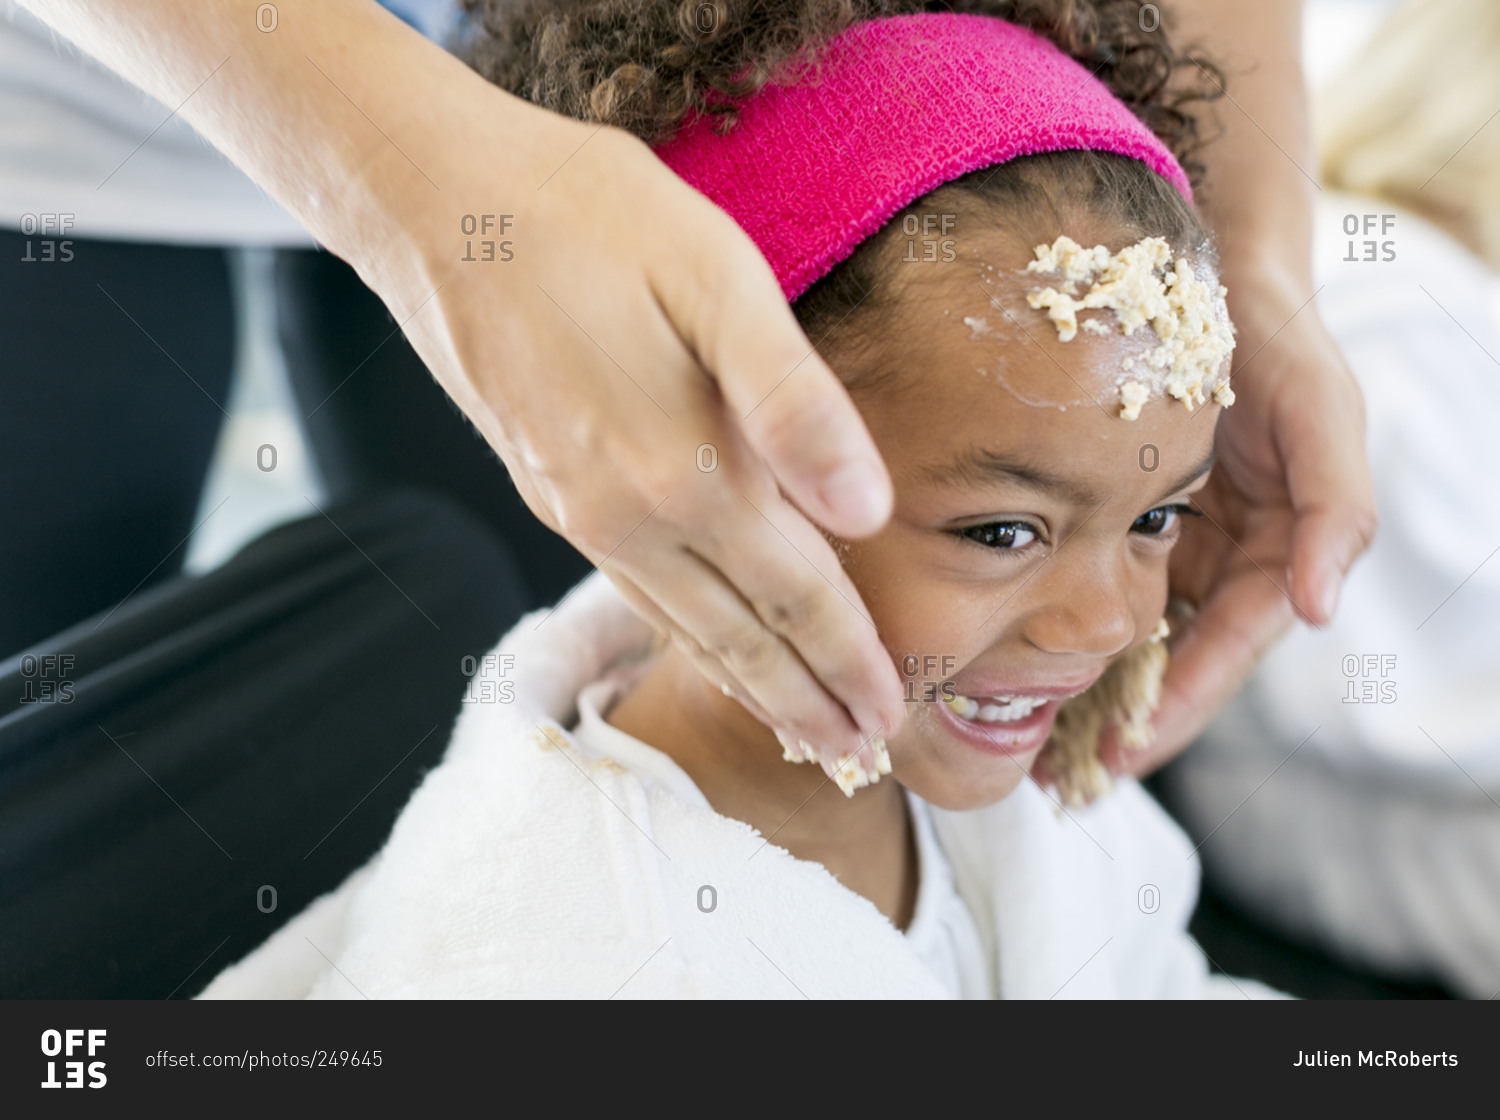 Santa Fe, New Mexico - June 24, 2015: Little girl getting\
oatmeal scrub at a spa party designed by Parties for Peanuts stock\
photo - OFFSET